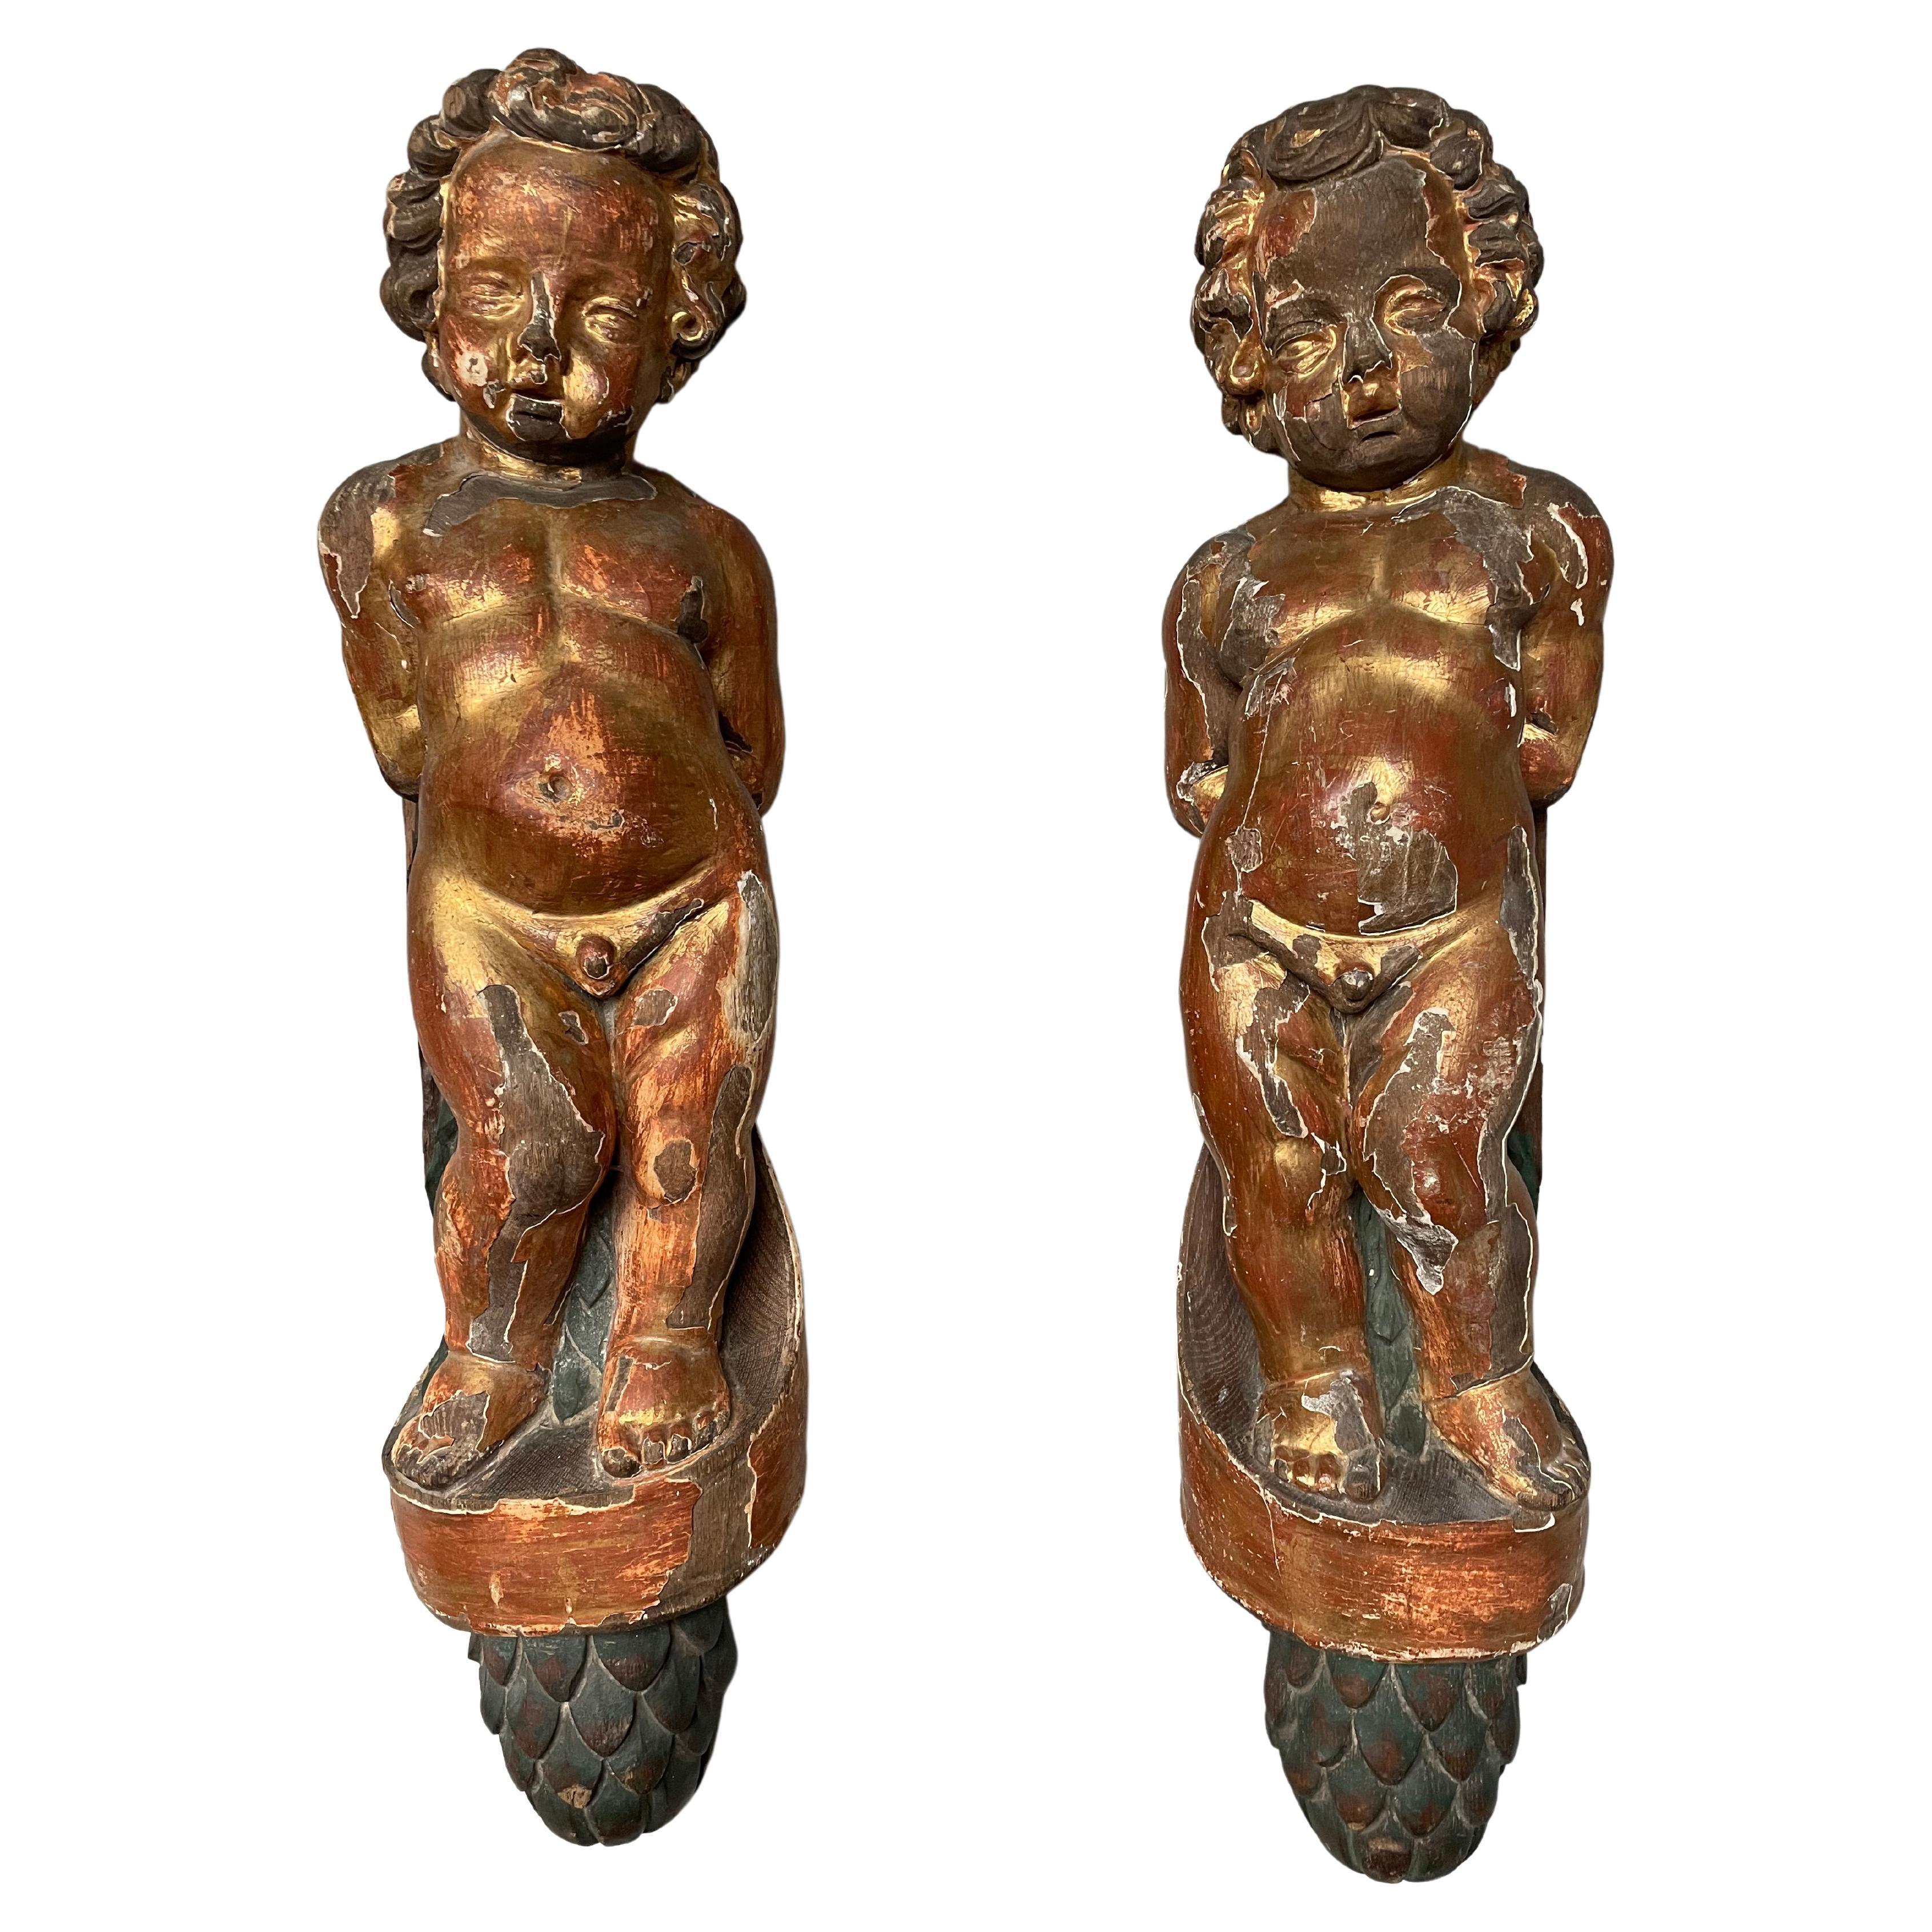 Baroque Revival Pair of 1800s Hand Carved & Gilt Solid Oak Wall Cherubs / Putti